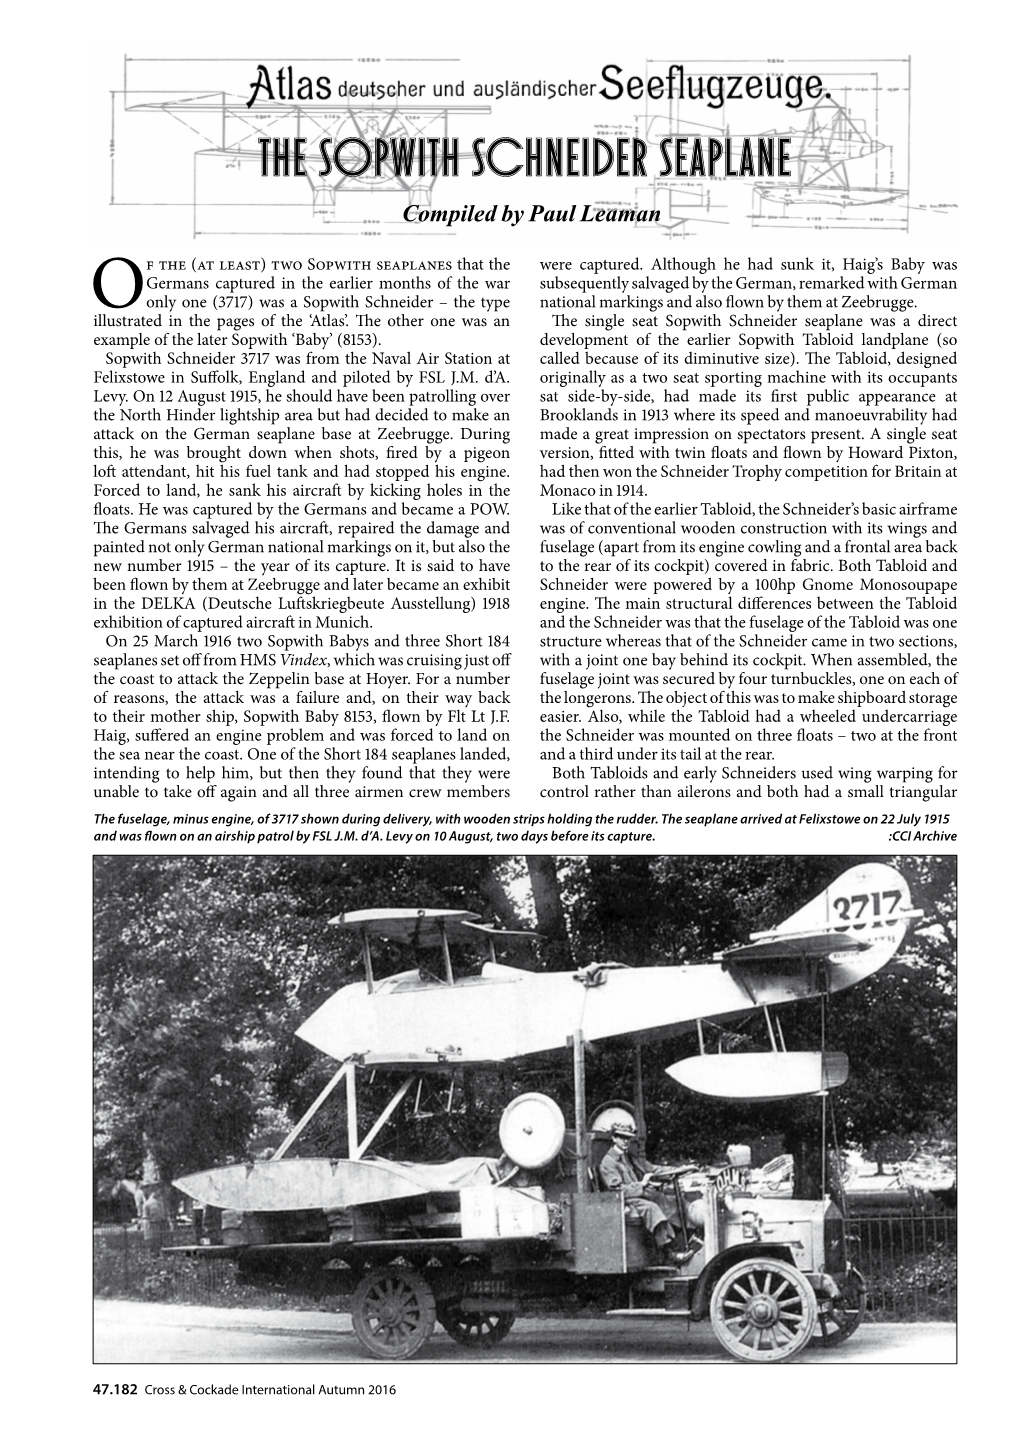 The Sopwith Schneider Seaplane Compiled by Paul Leaman